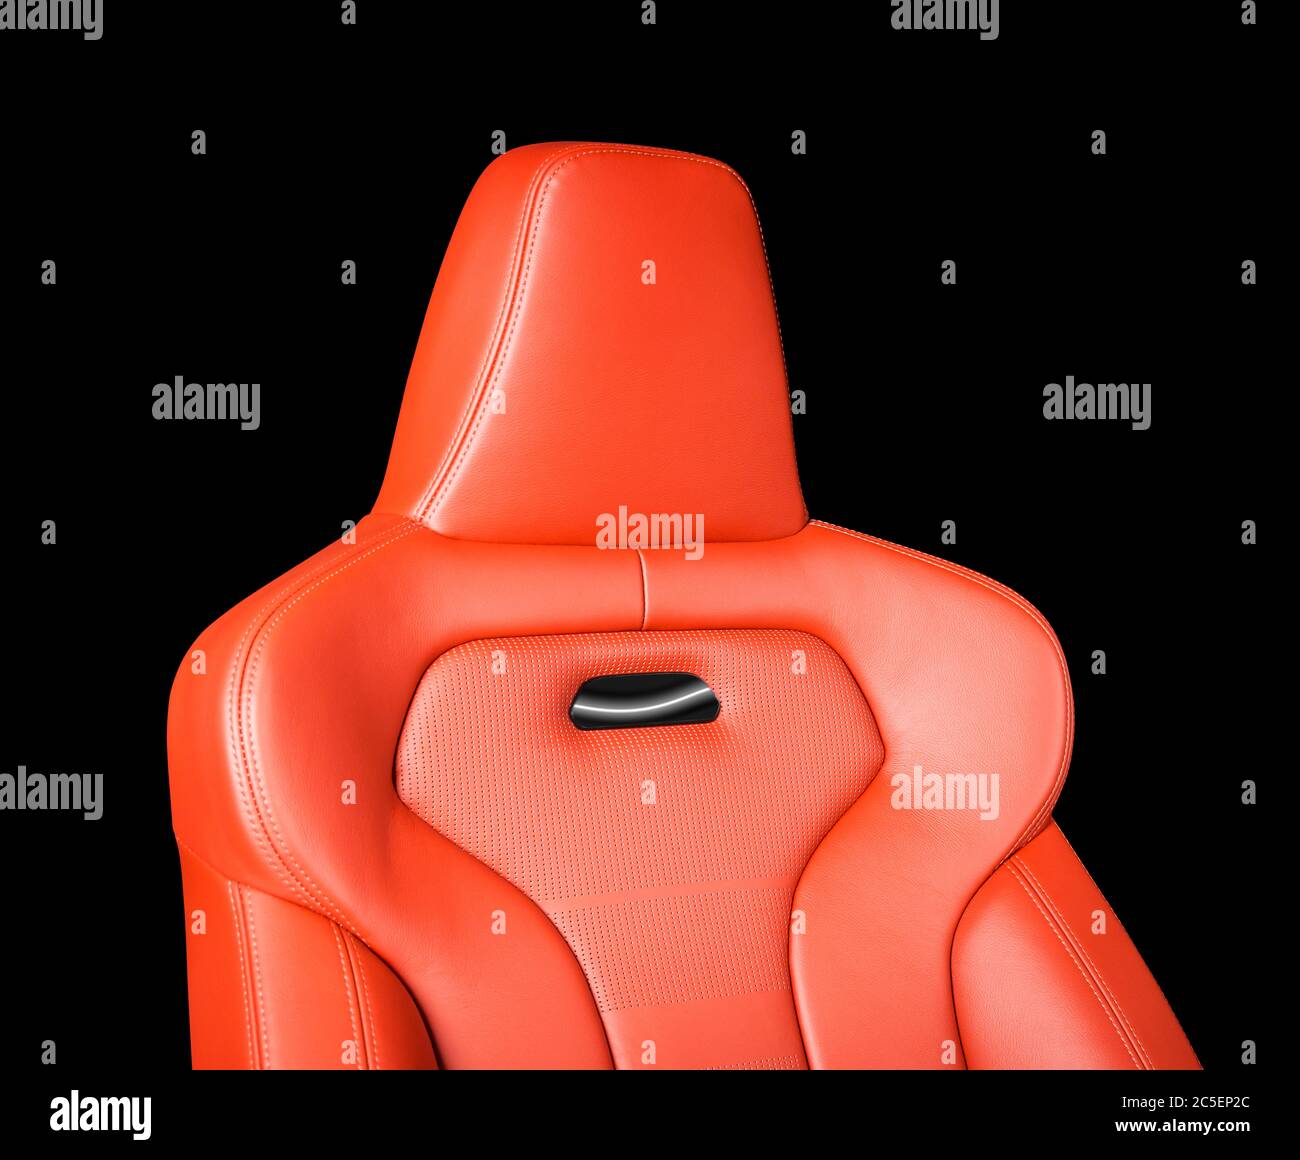 Comfortable leather seat. Red perforarated leather car seat isolated on black background with copy space Stock Photo